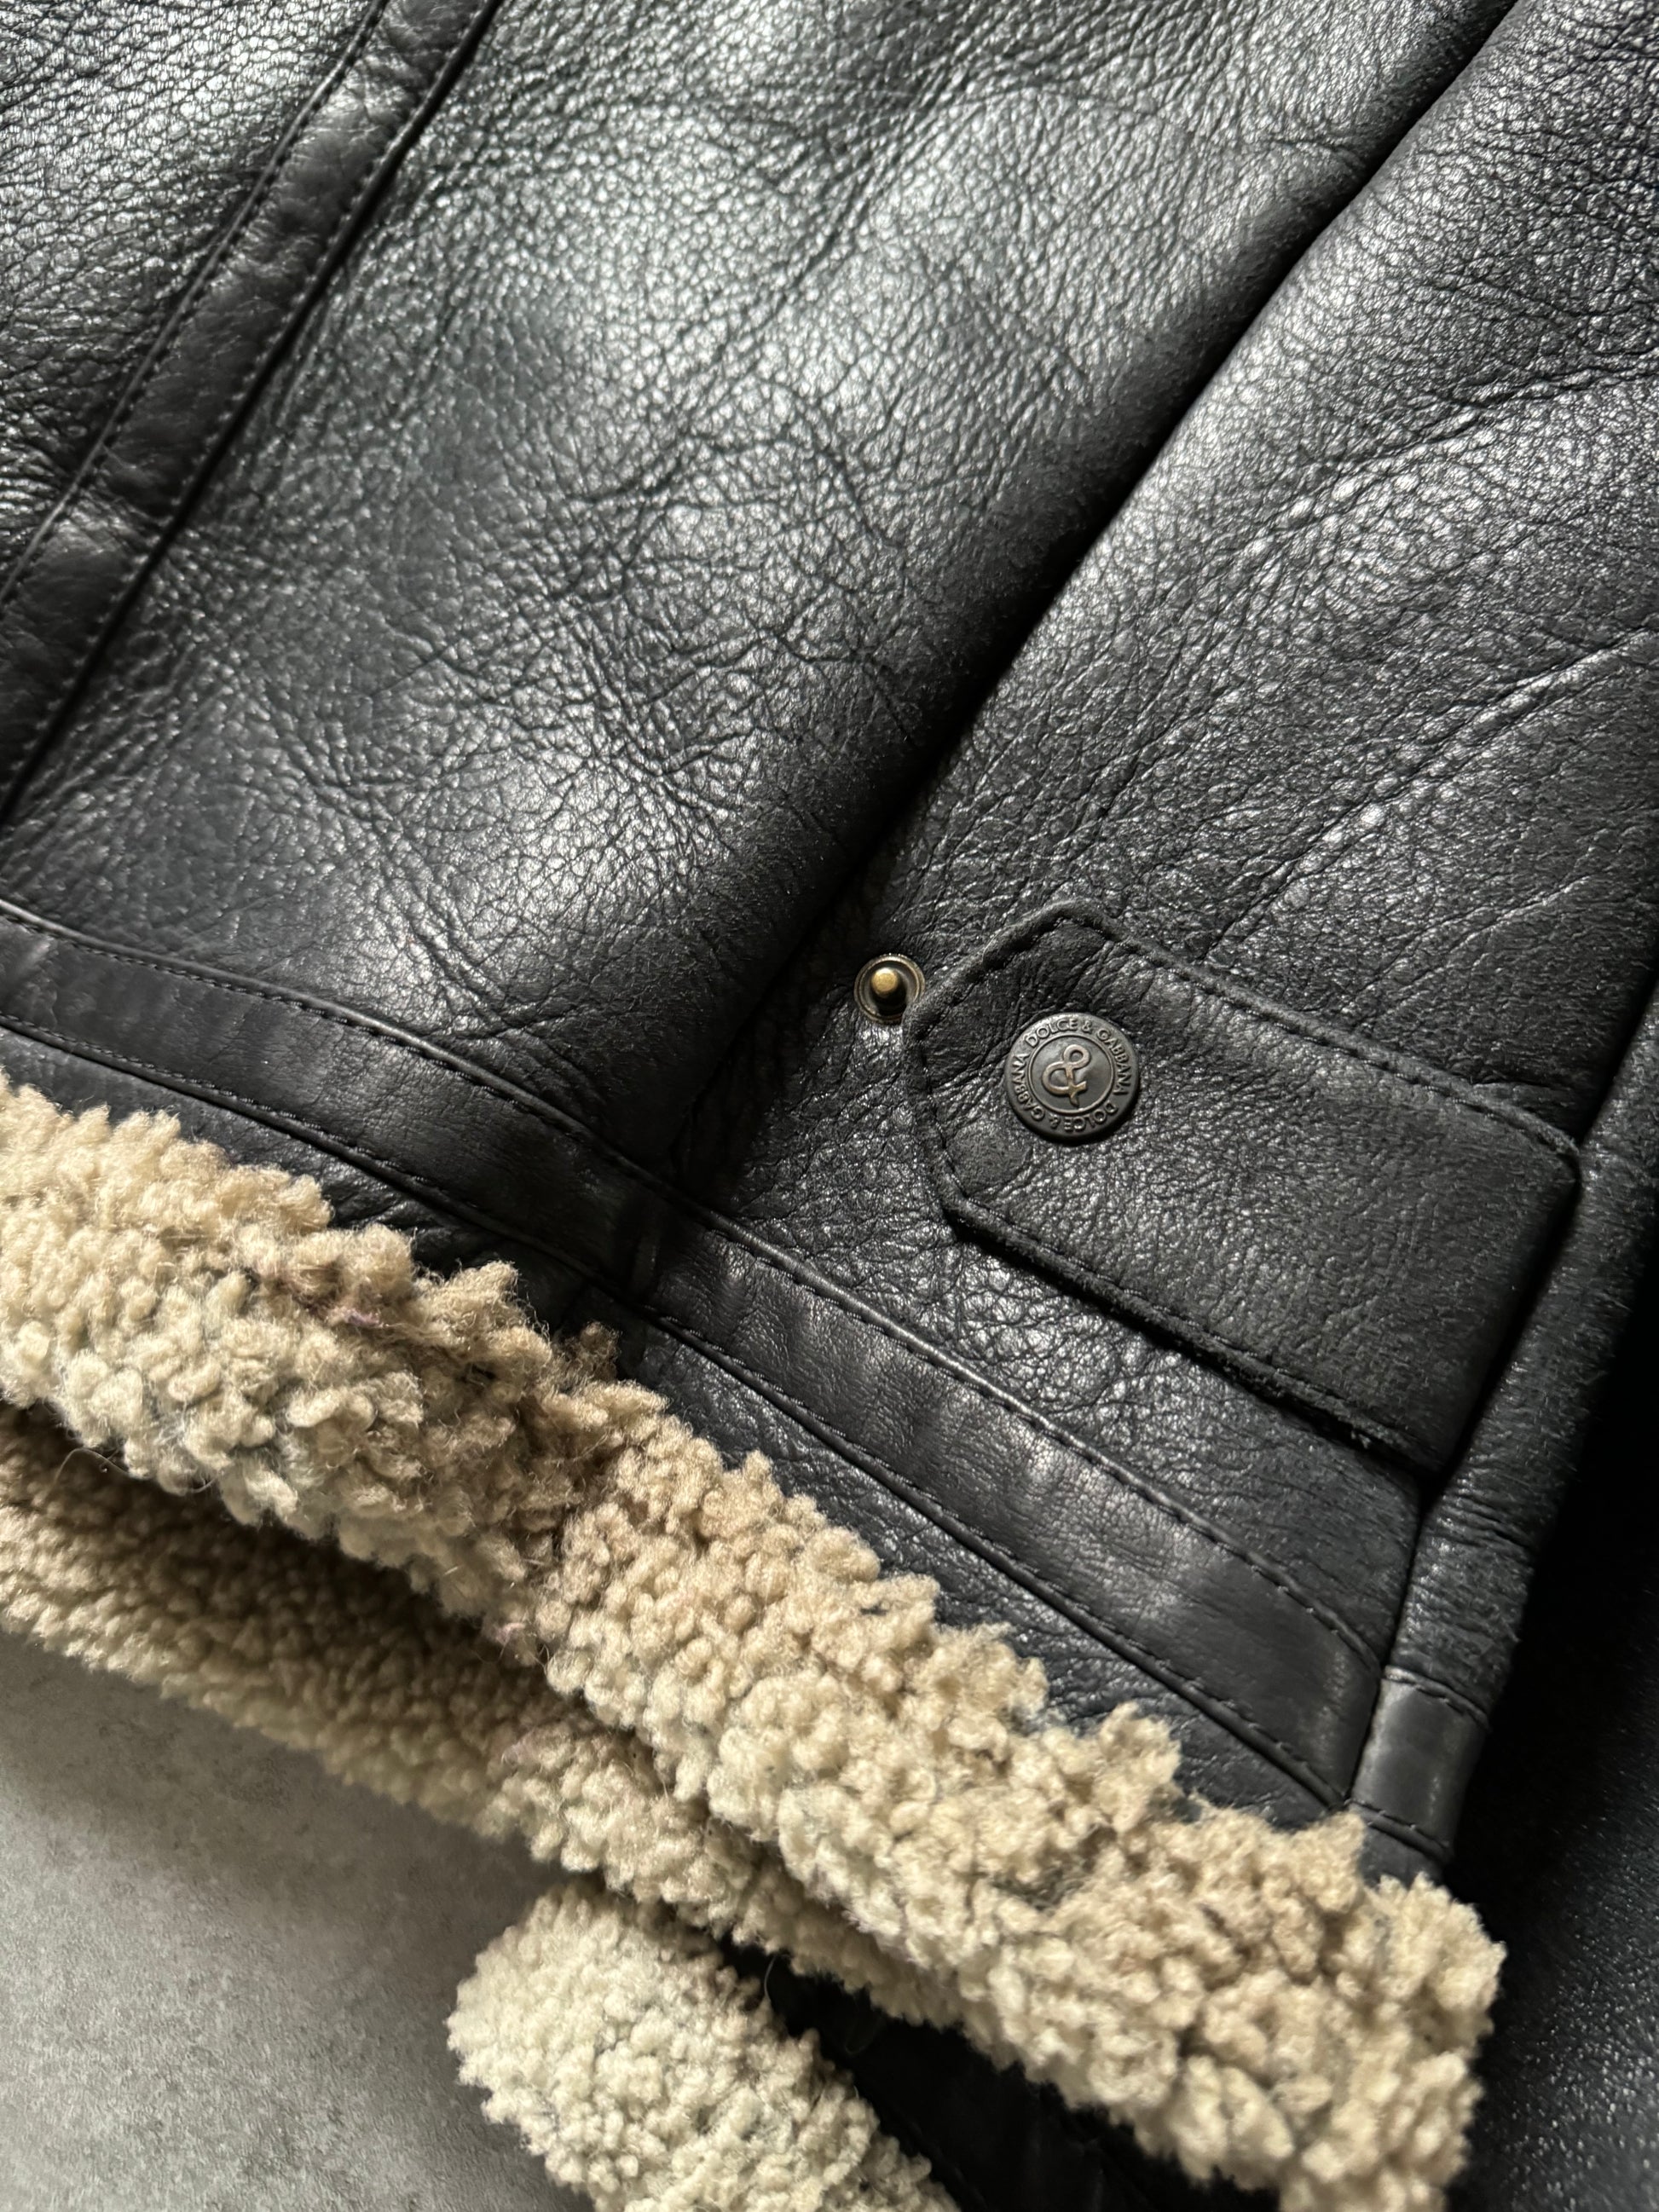 1990s Dolce & Gabbana Shearling Leather Jacket  (S) - 6